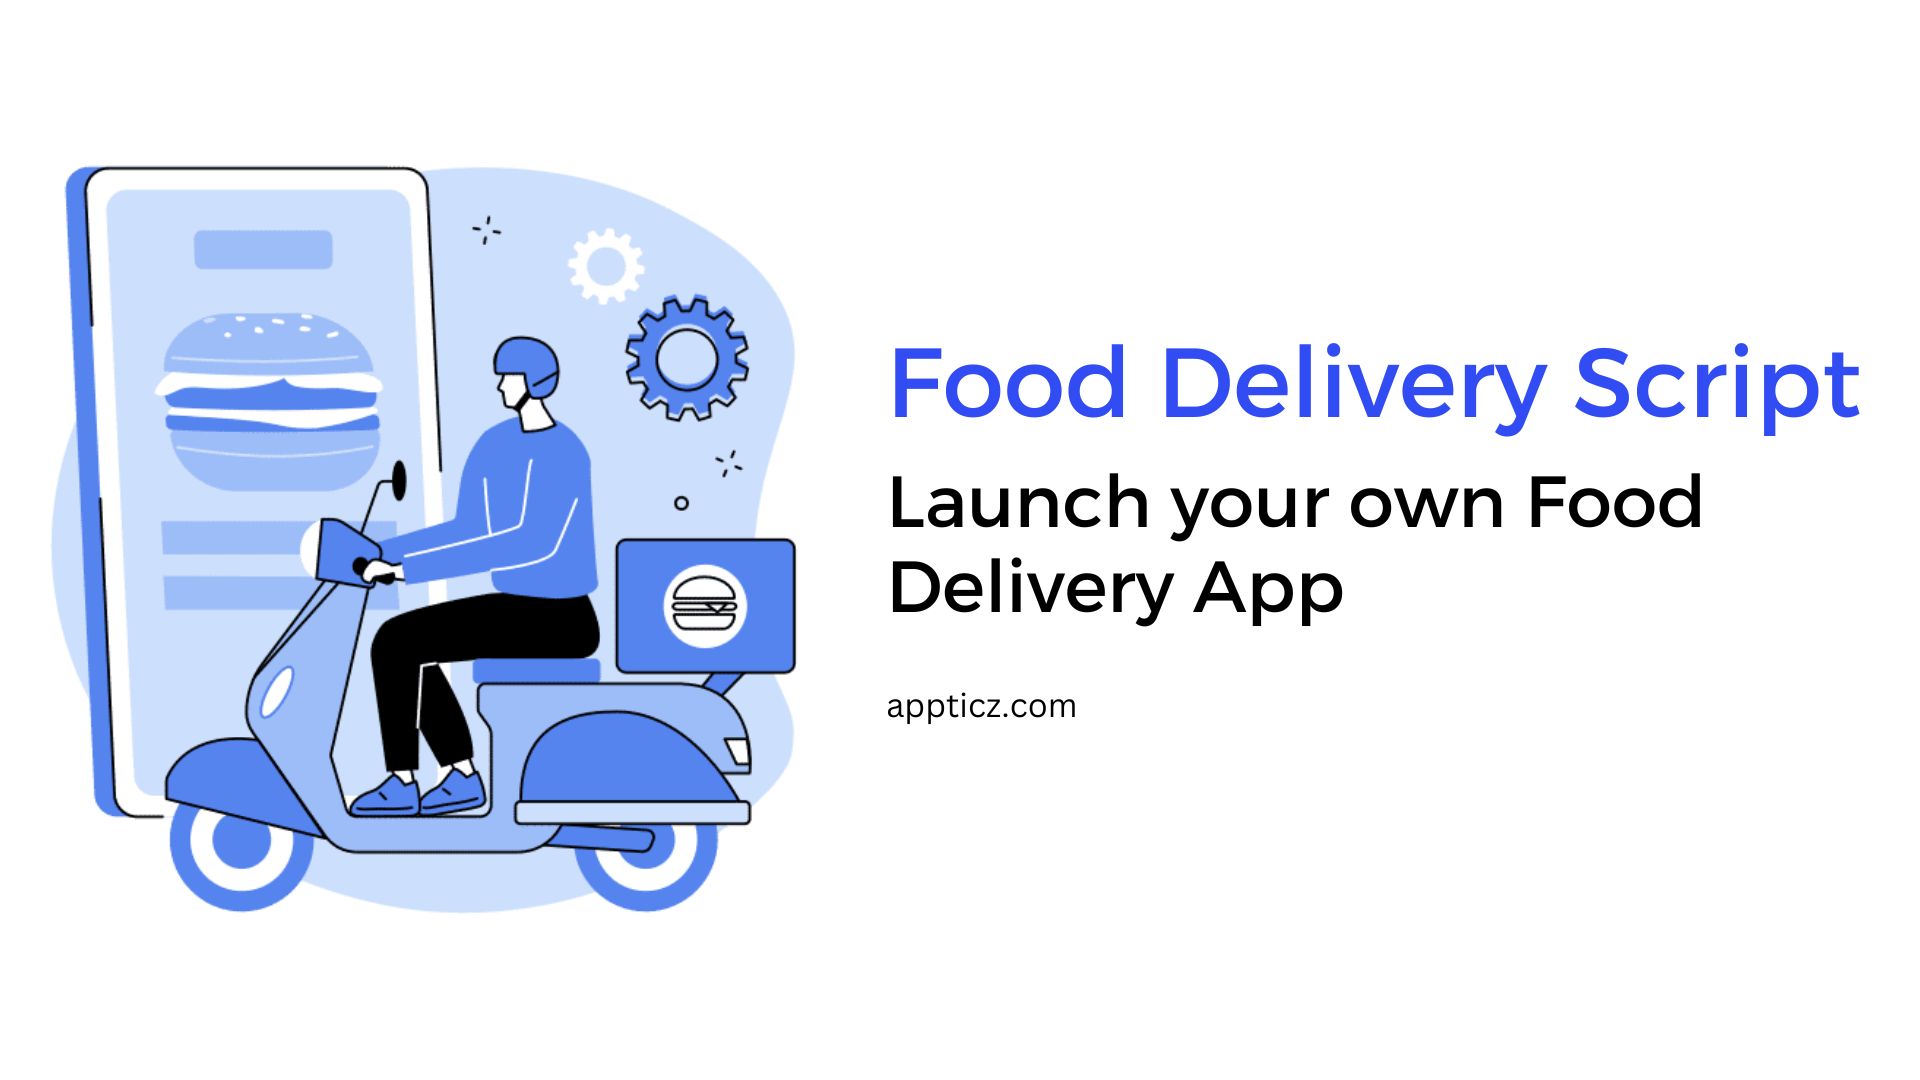 Create a Food Delivery App for your Business